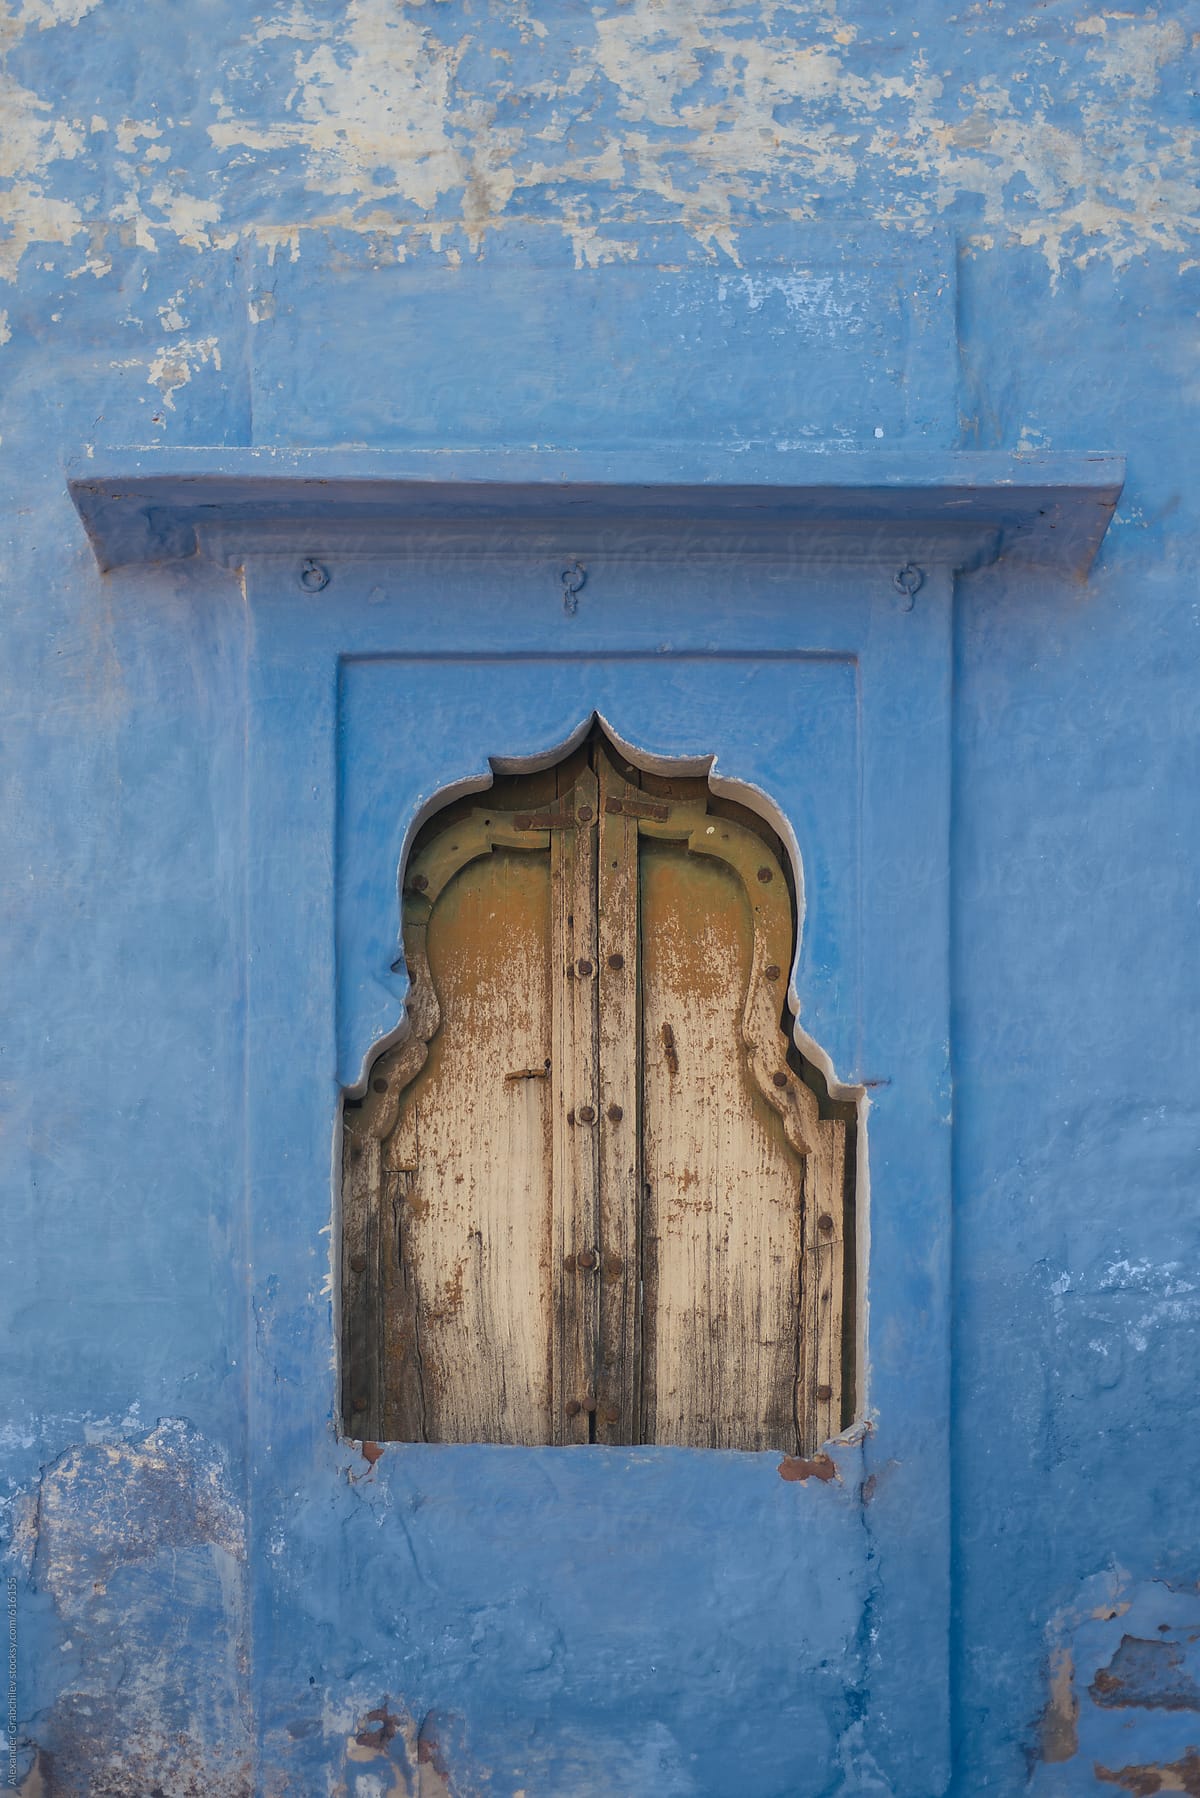 Ornate Indian Window In A Blue City